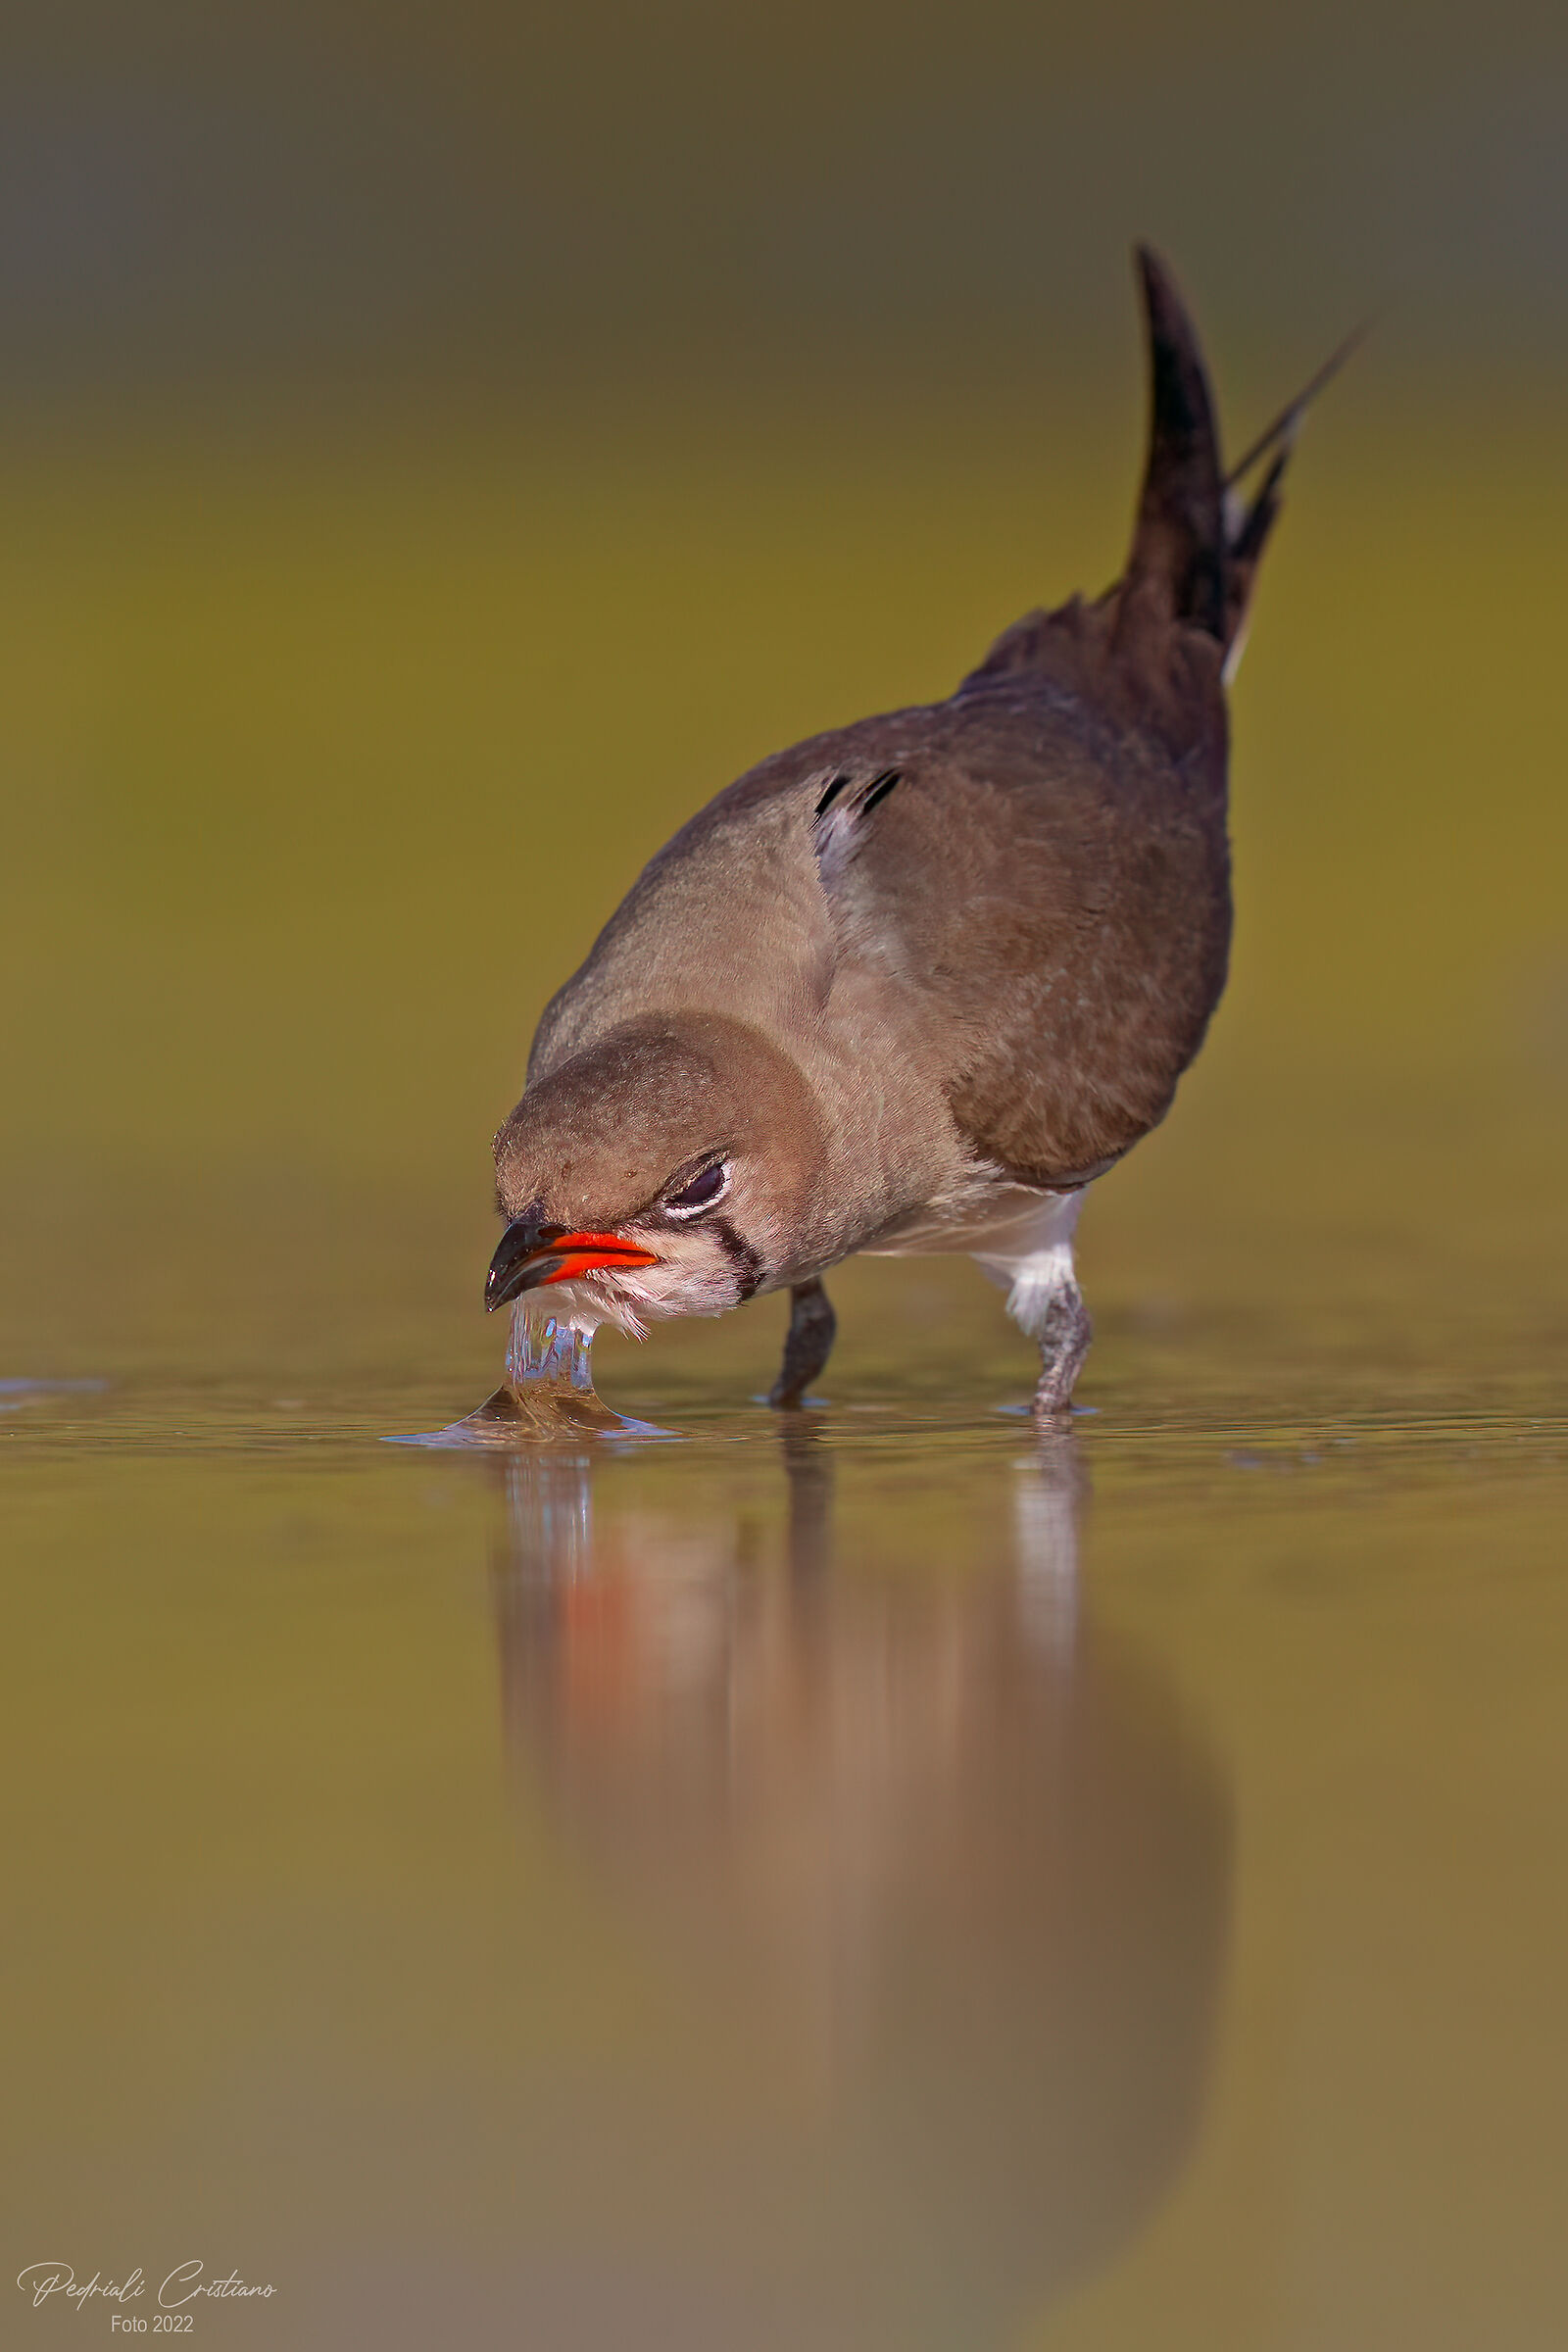 Partridge of the sea... thirst...